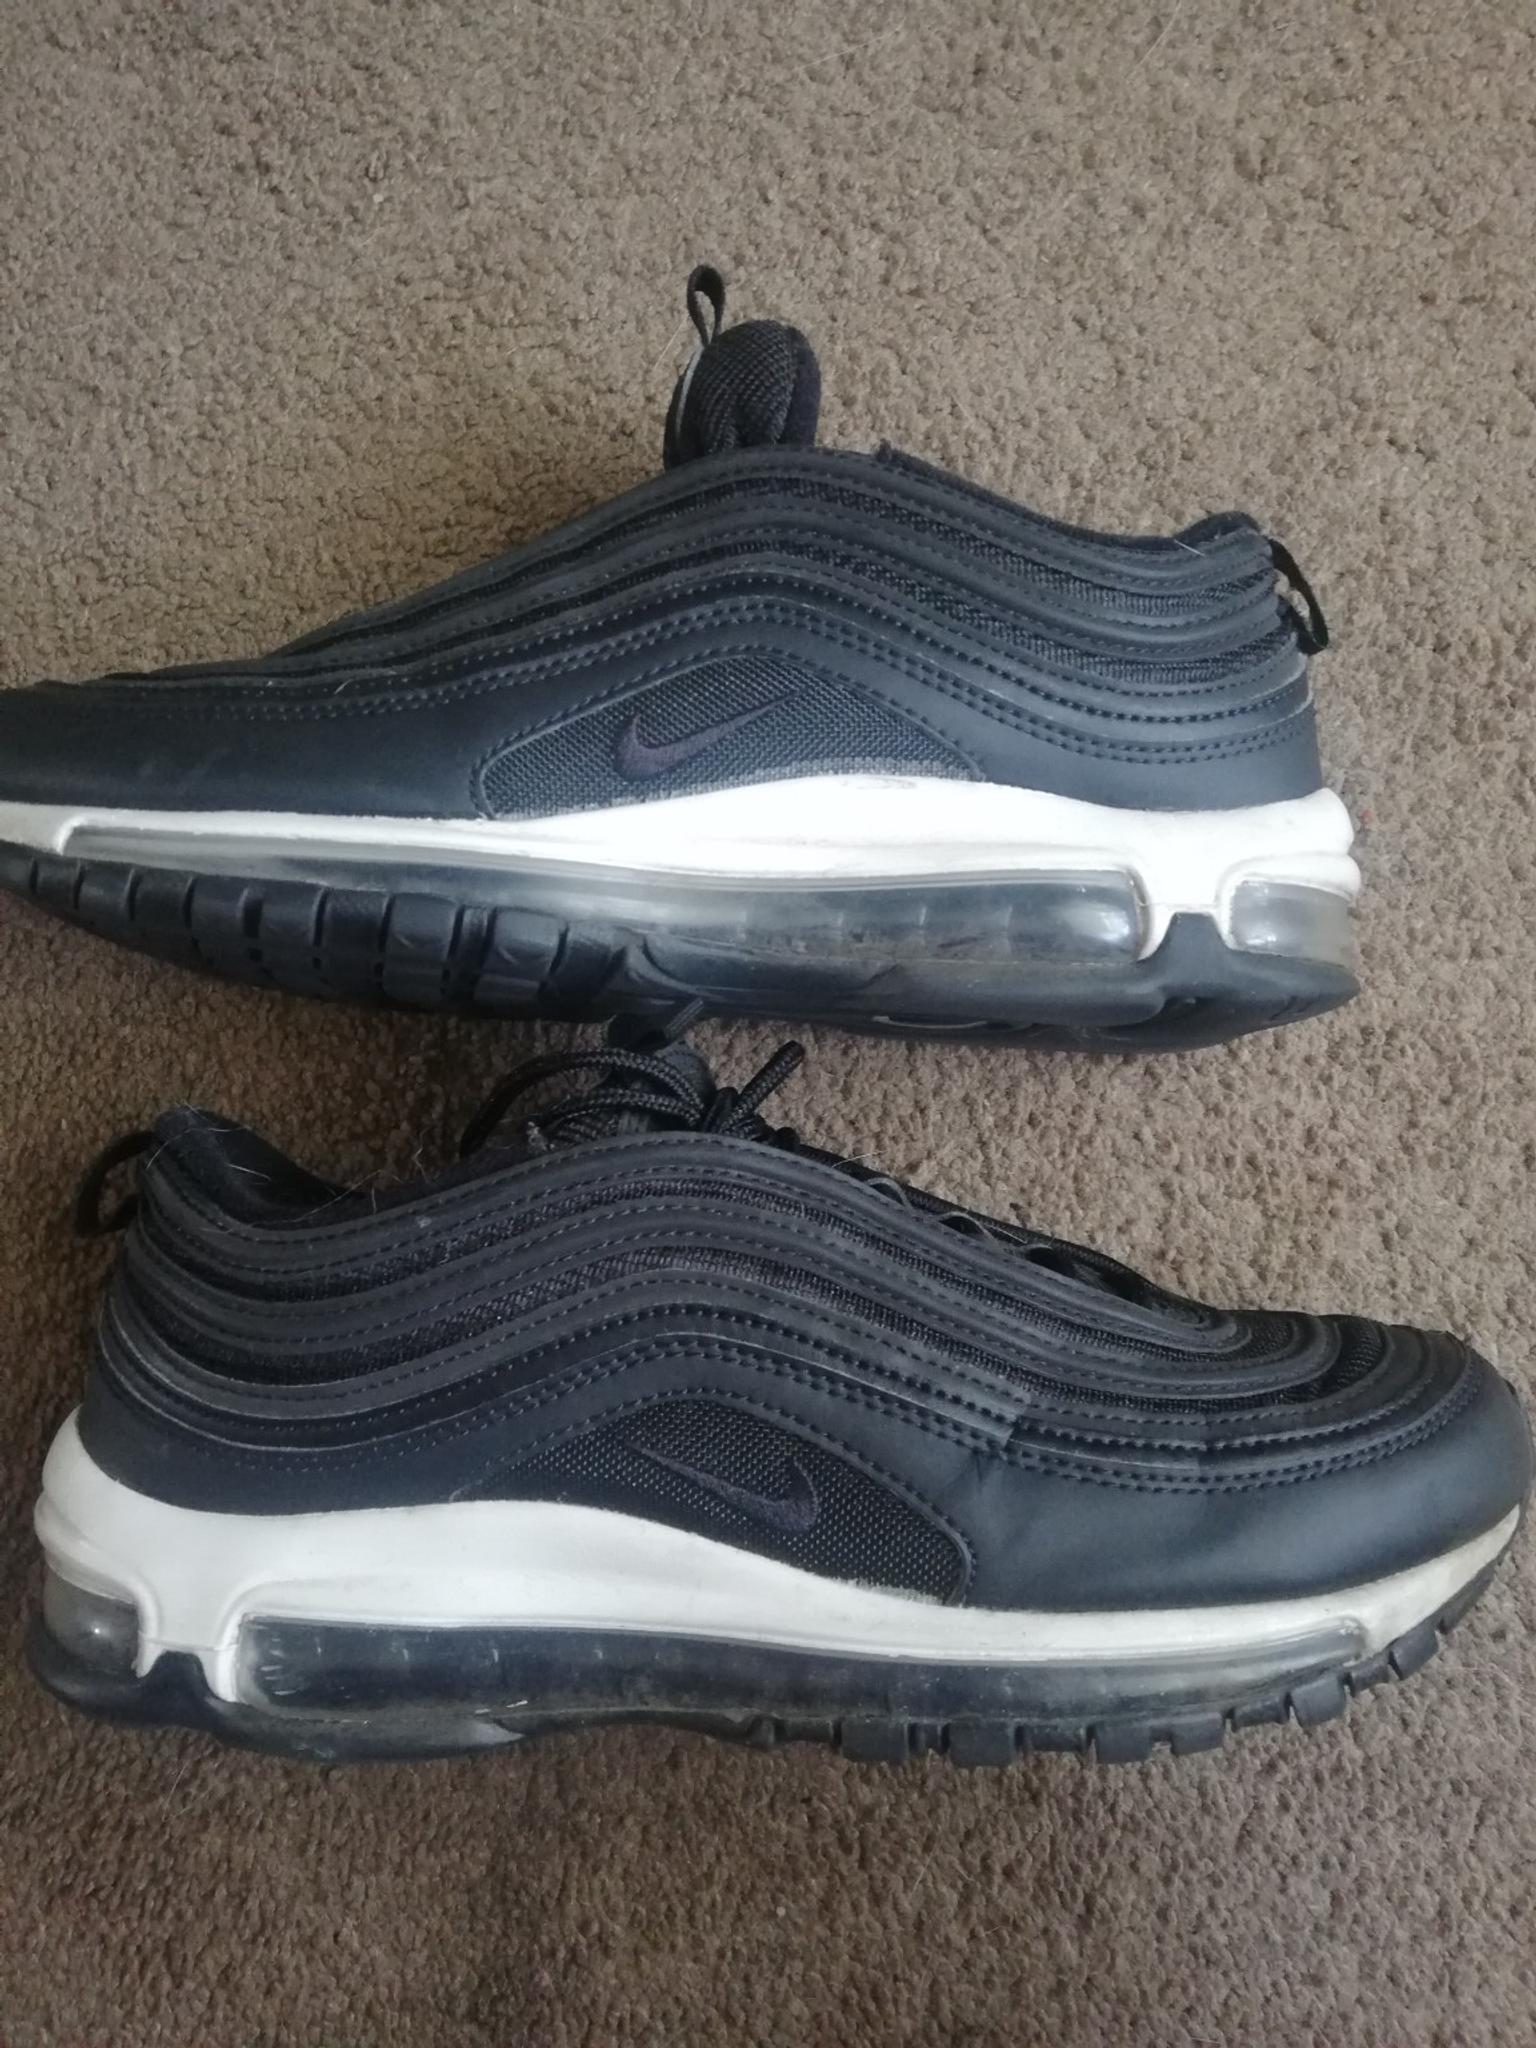 97s size 7